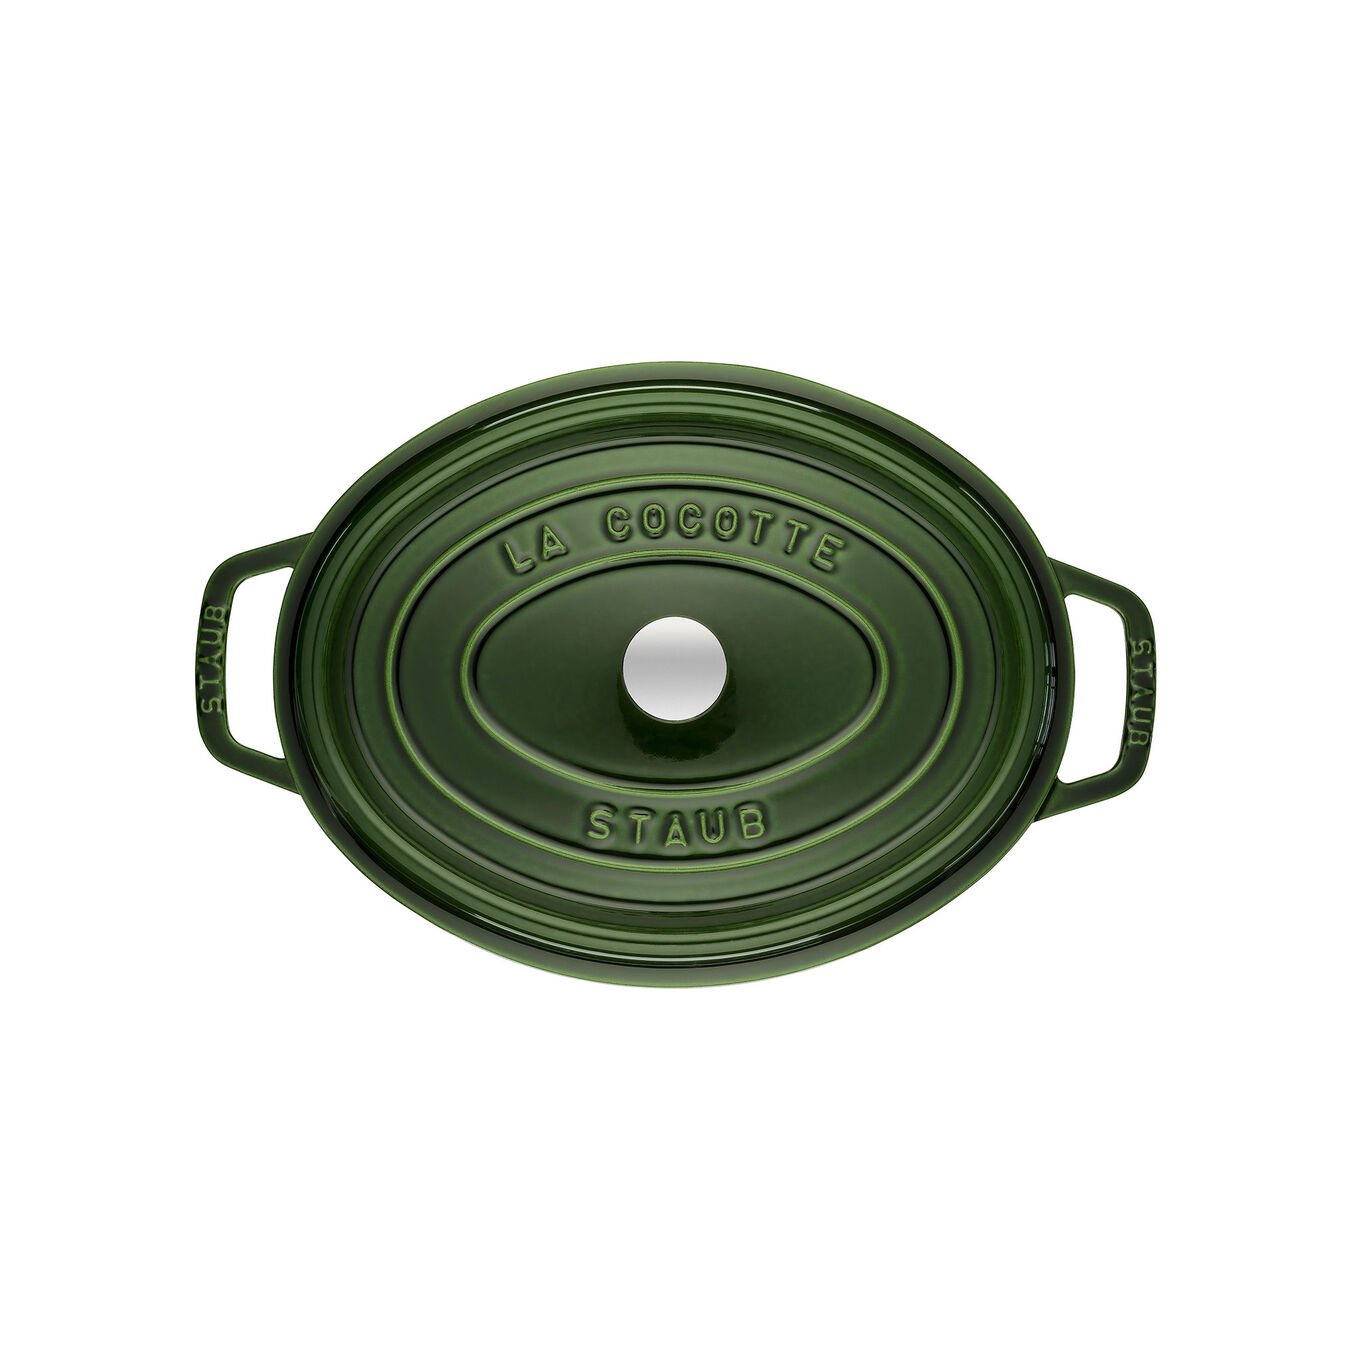 5.5 l cast iron oval Cocotte, basil-green,,large 3